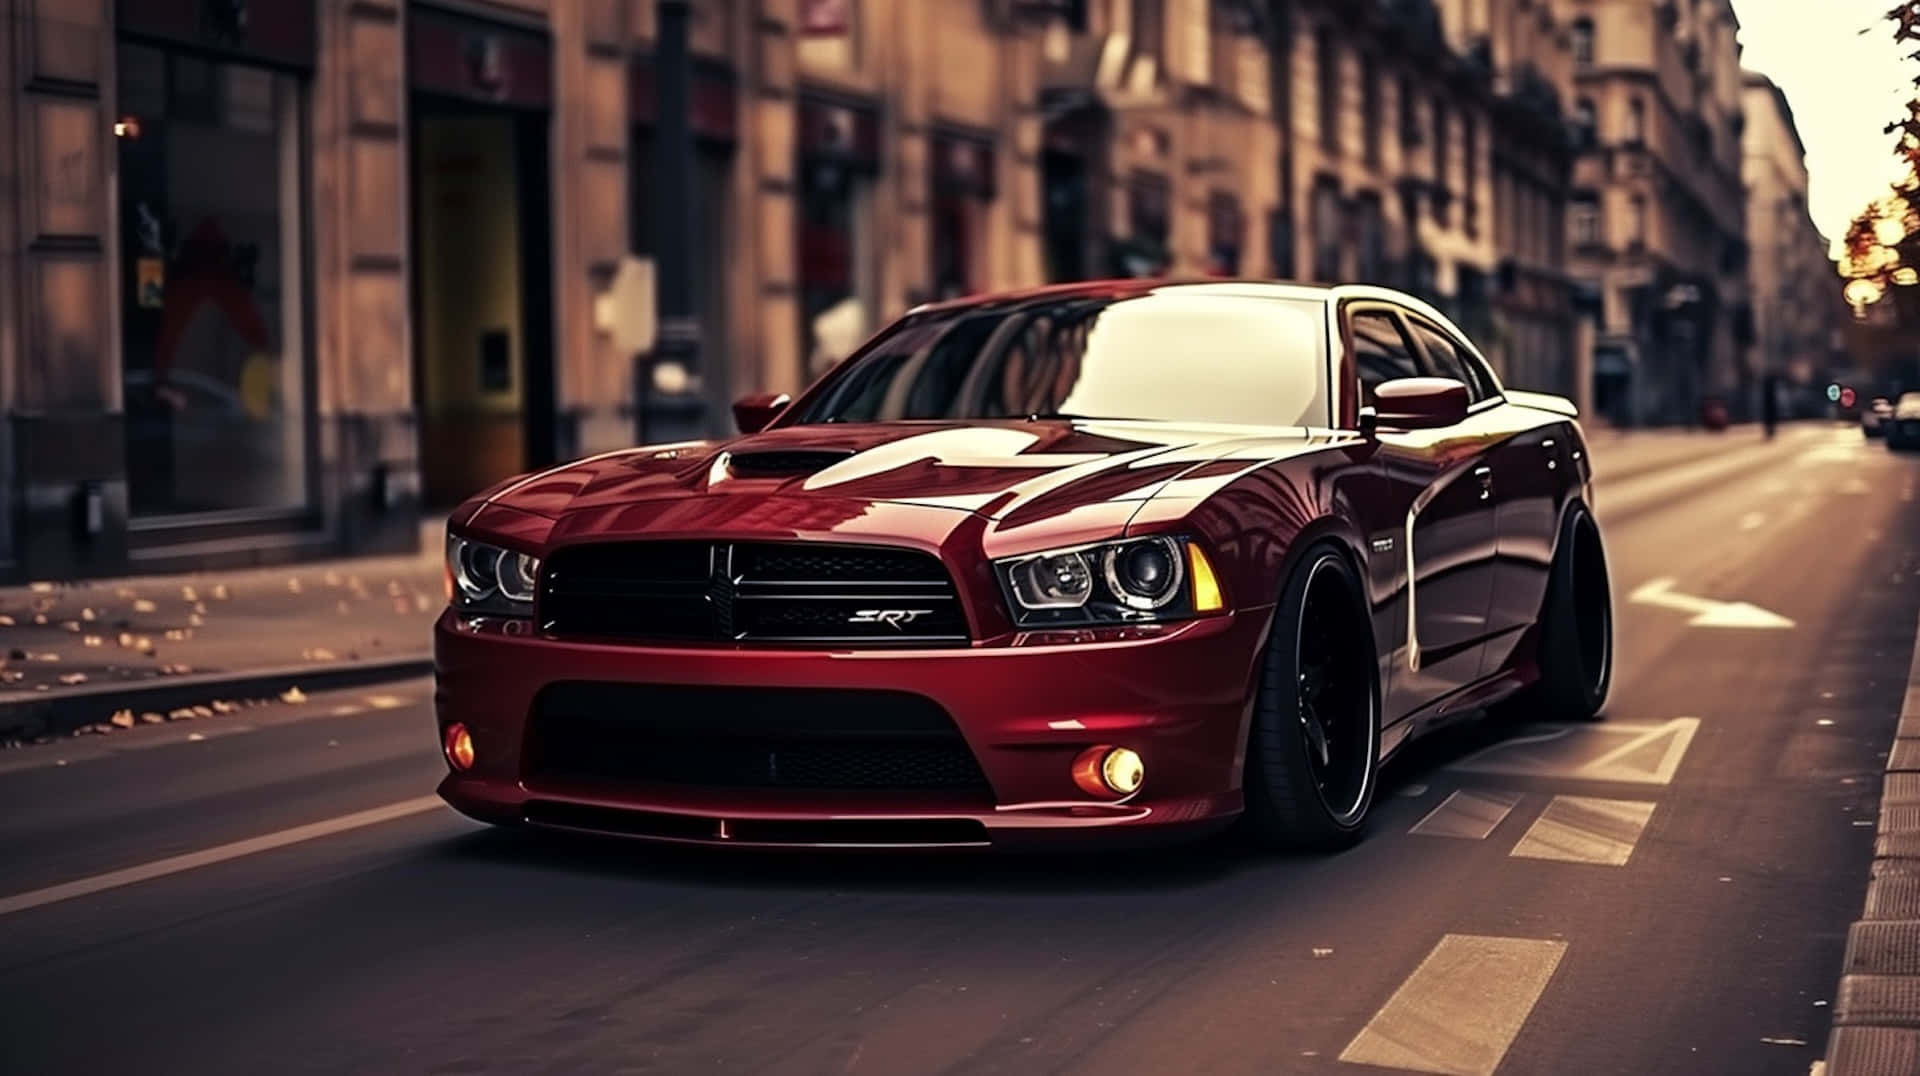 Red Dodge Charger Hellcat Urban Backdrop Wallpaper